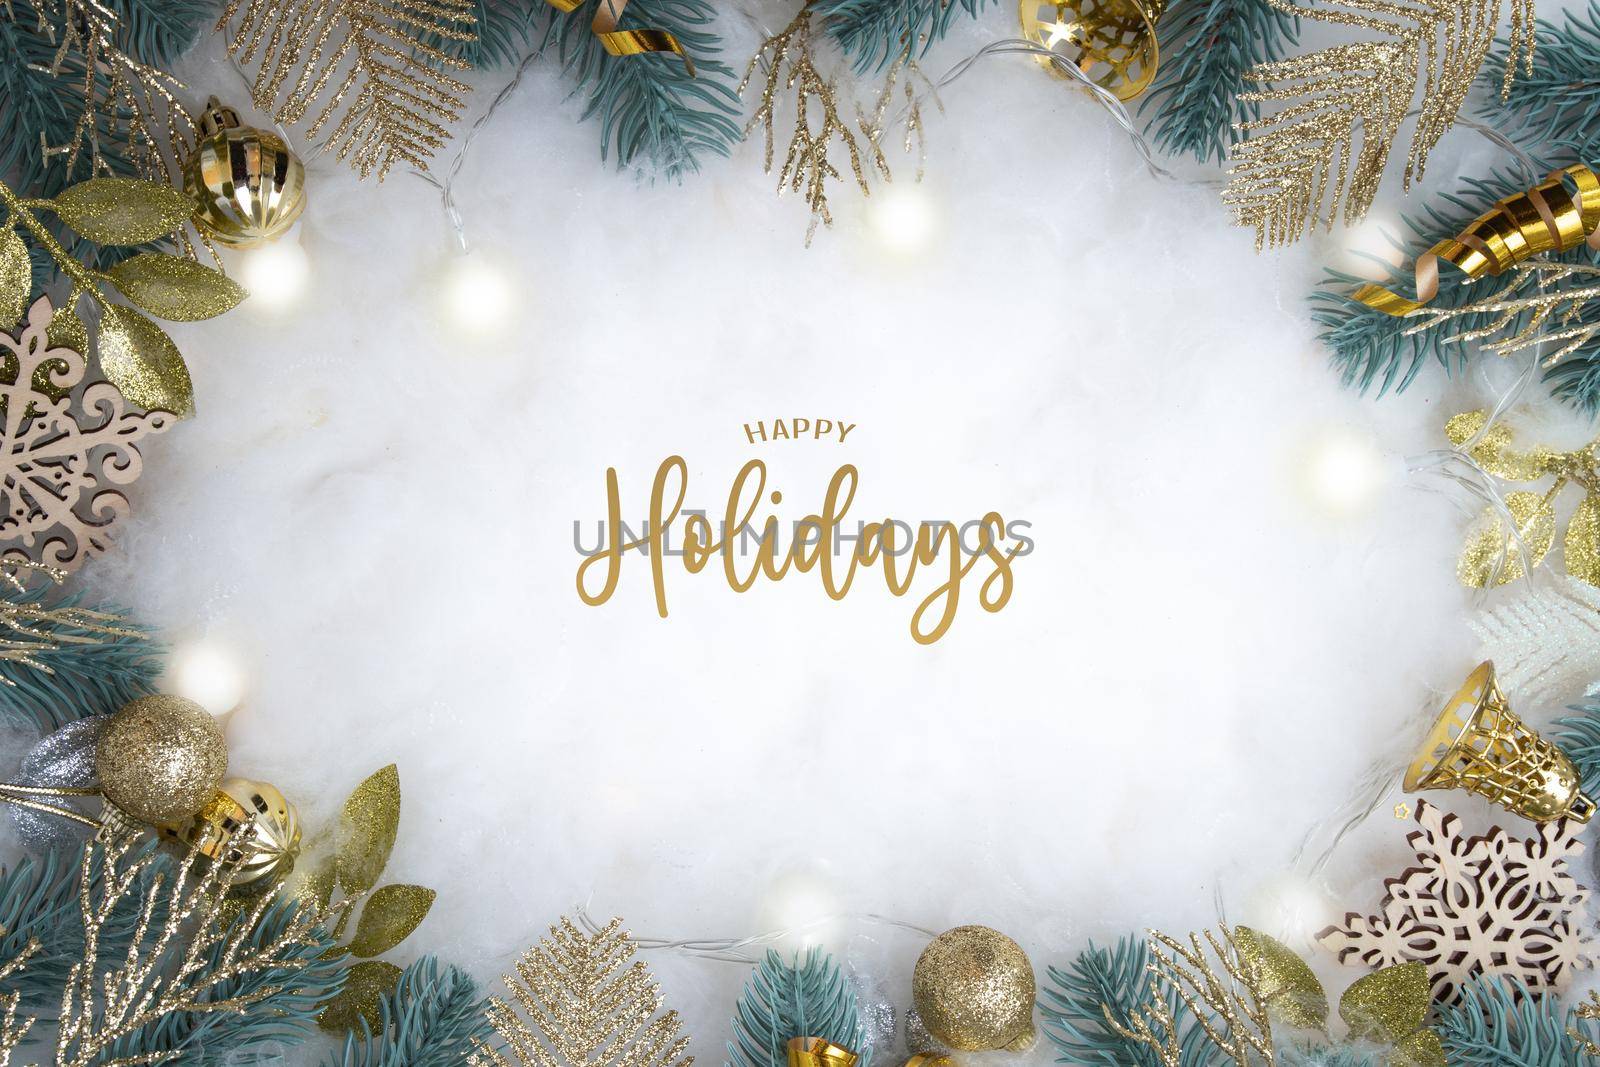 Happy Holidays text with frame made of Christmas decorations on a snowy background flat lay top view